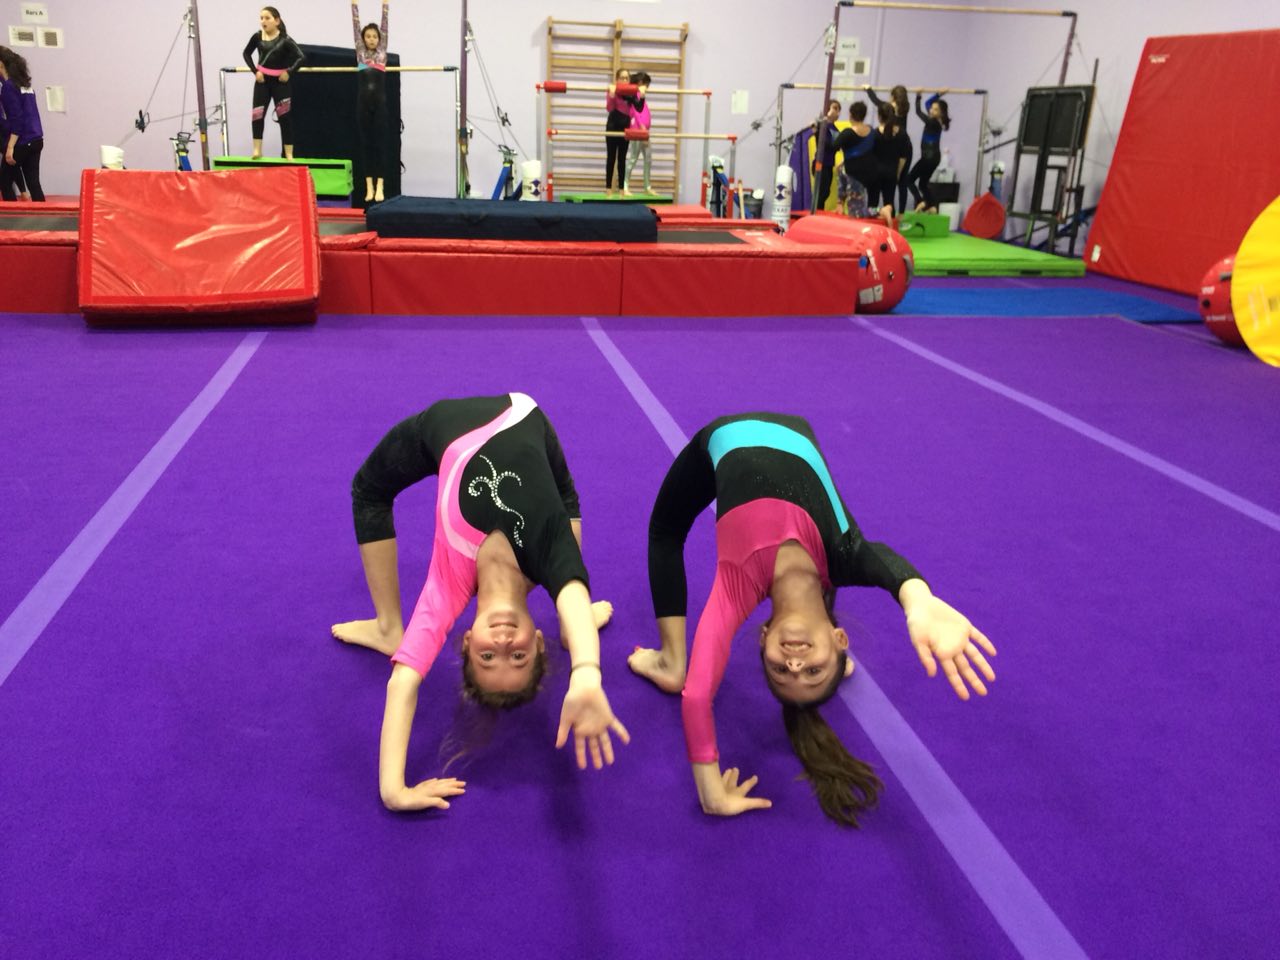 Recreational Track - These classes are the heartbeat of every gymnastics center. Designed to teach fundamental gymnastics skills in a fun and non-competitive setting, recreational classes are geared for children of all ages and levels who wish to experience the joy of this wonderful sport. No previous skill or experience necessary.